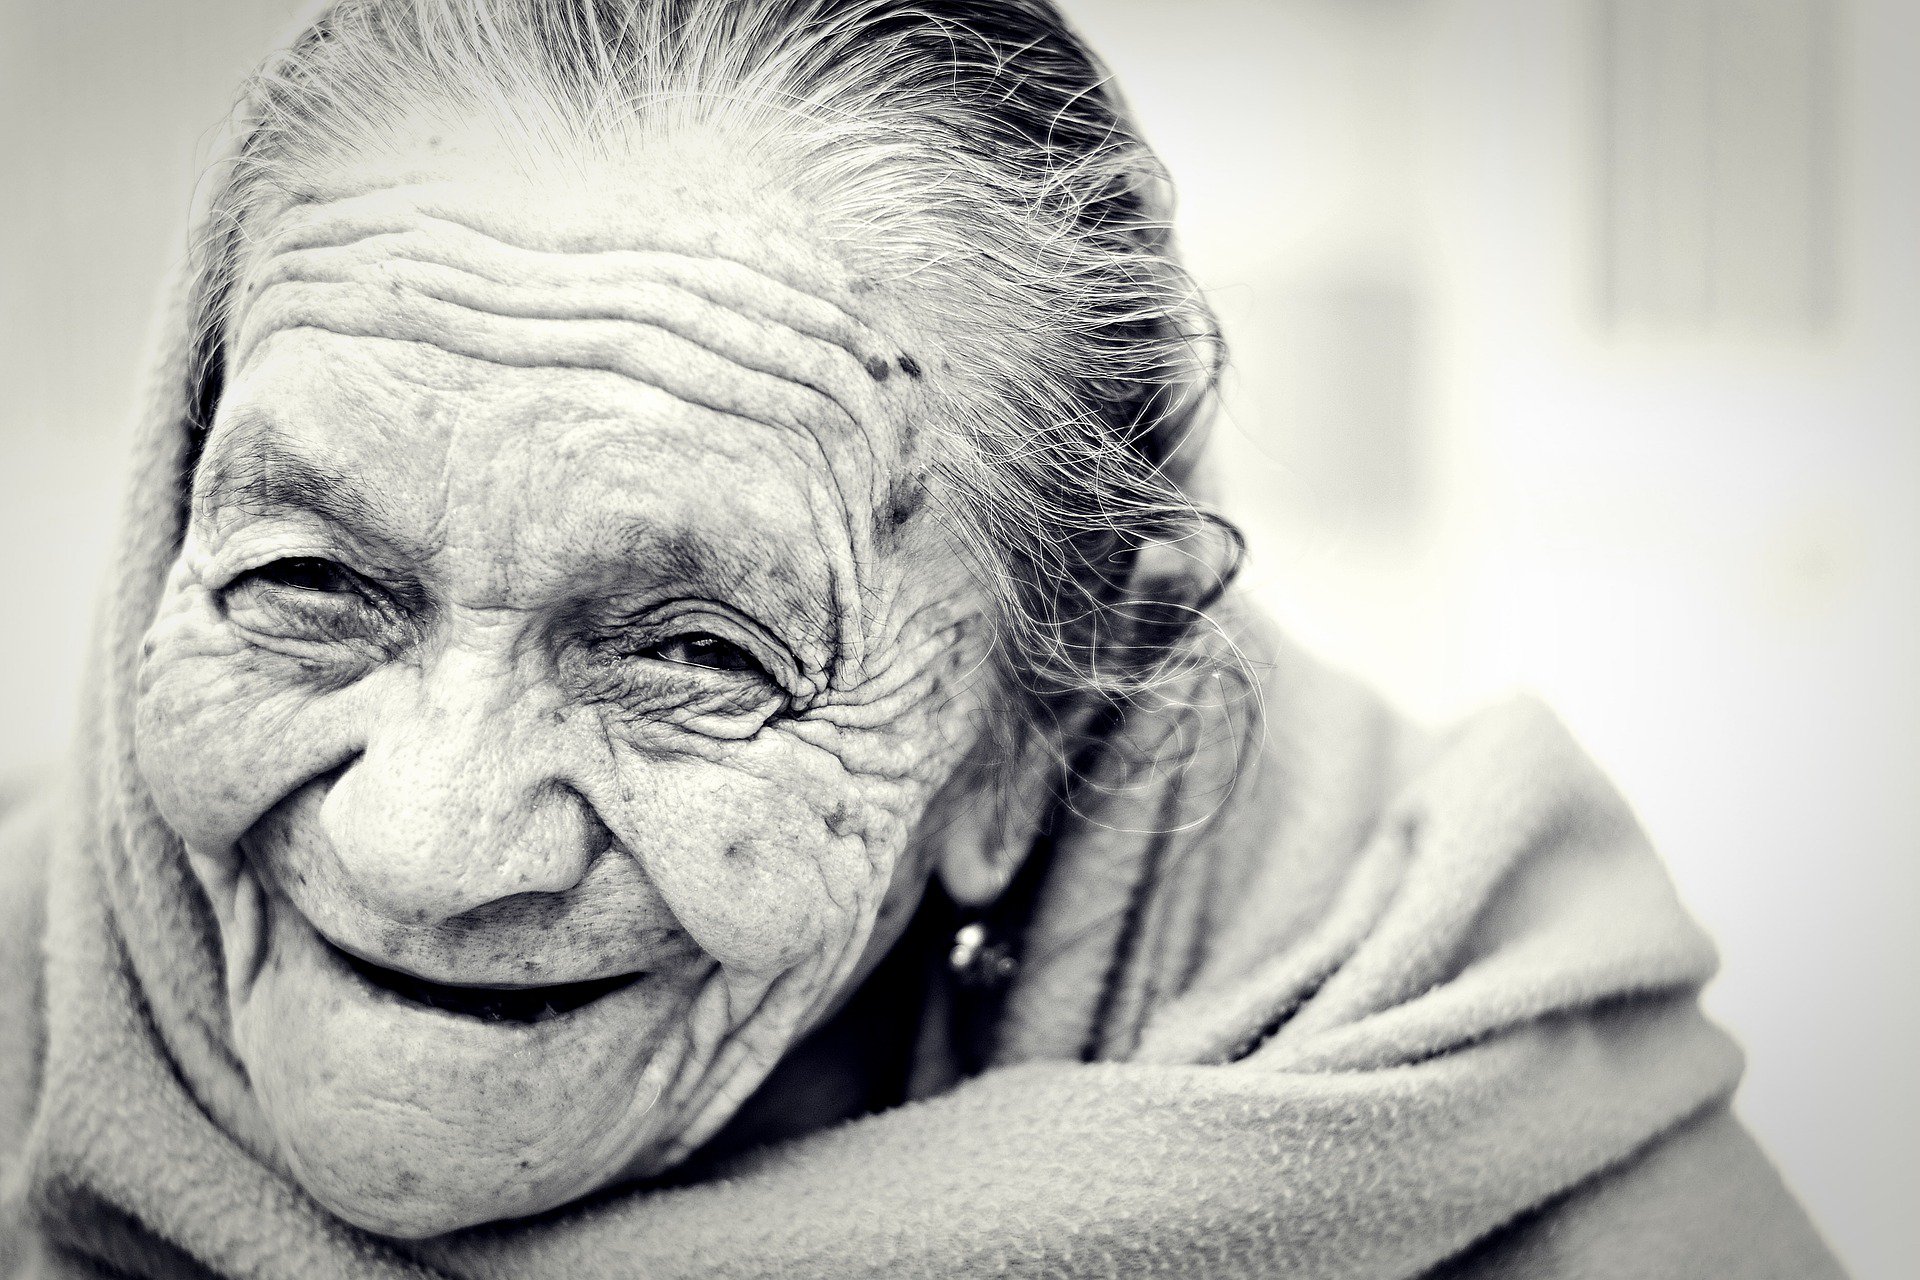 Pixabay on X: Laughing Old Woman - by Free-Photos